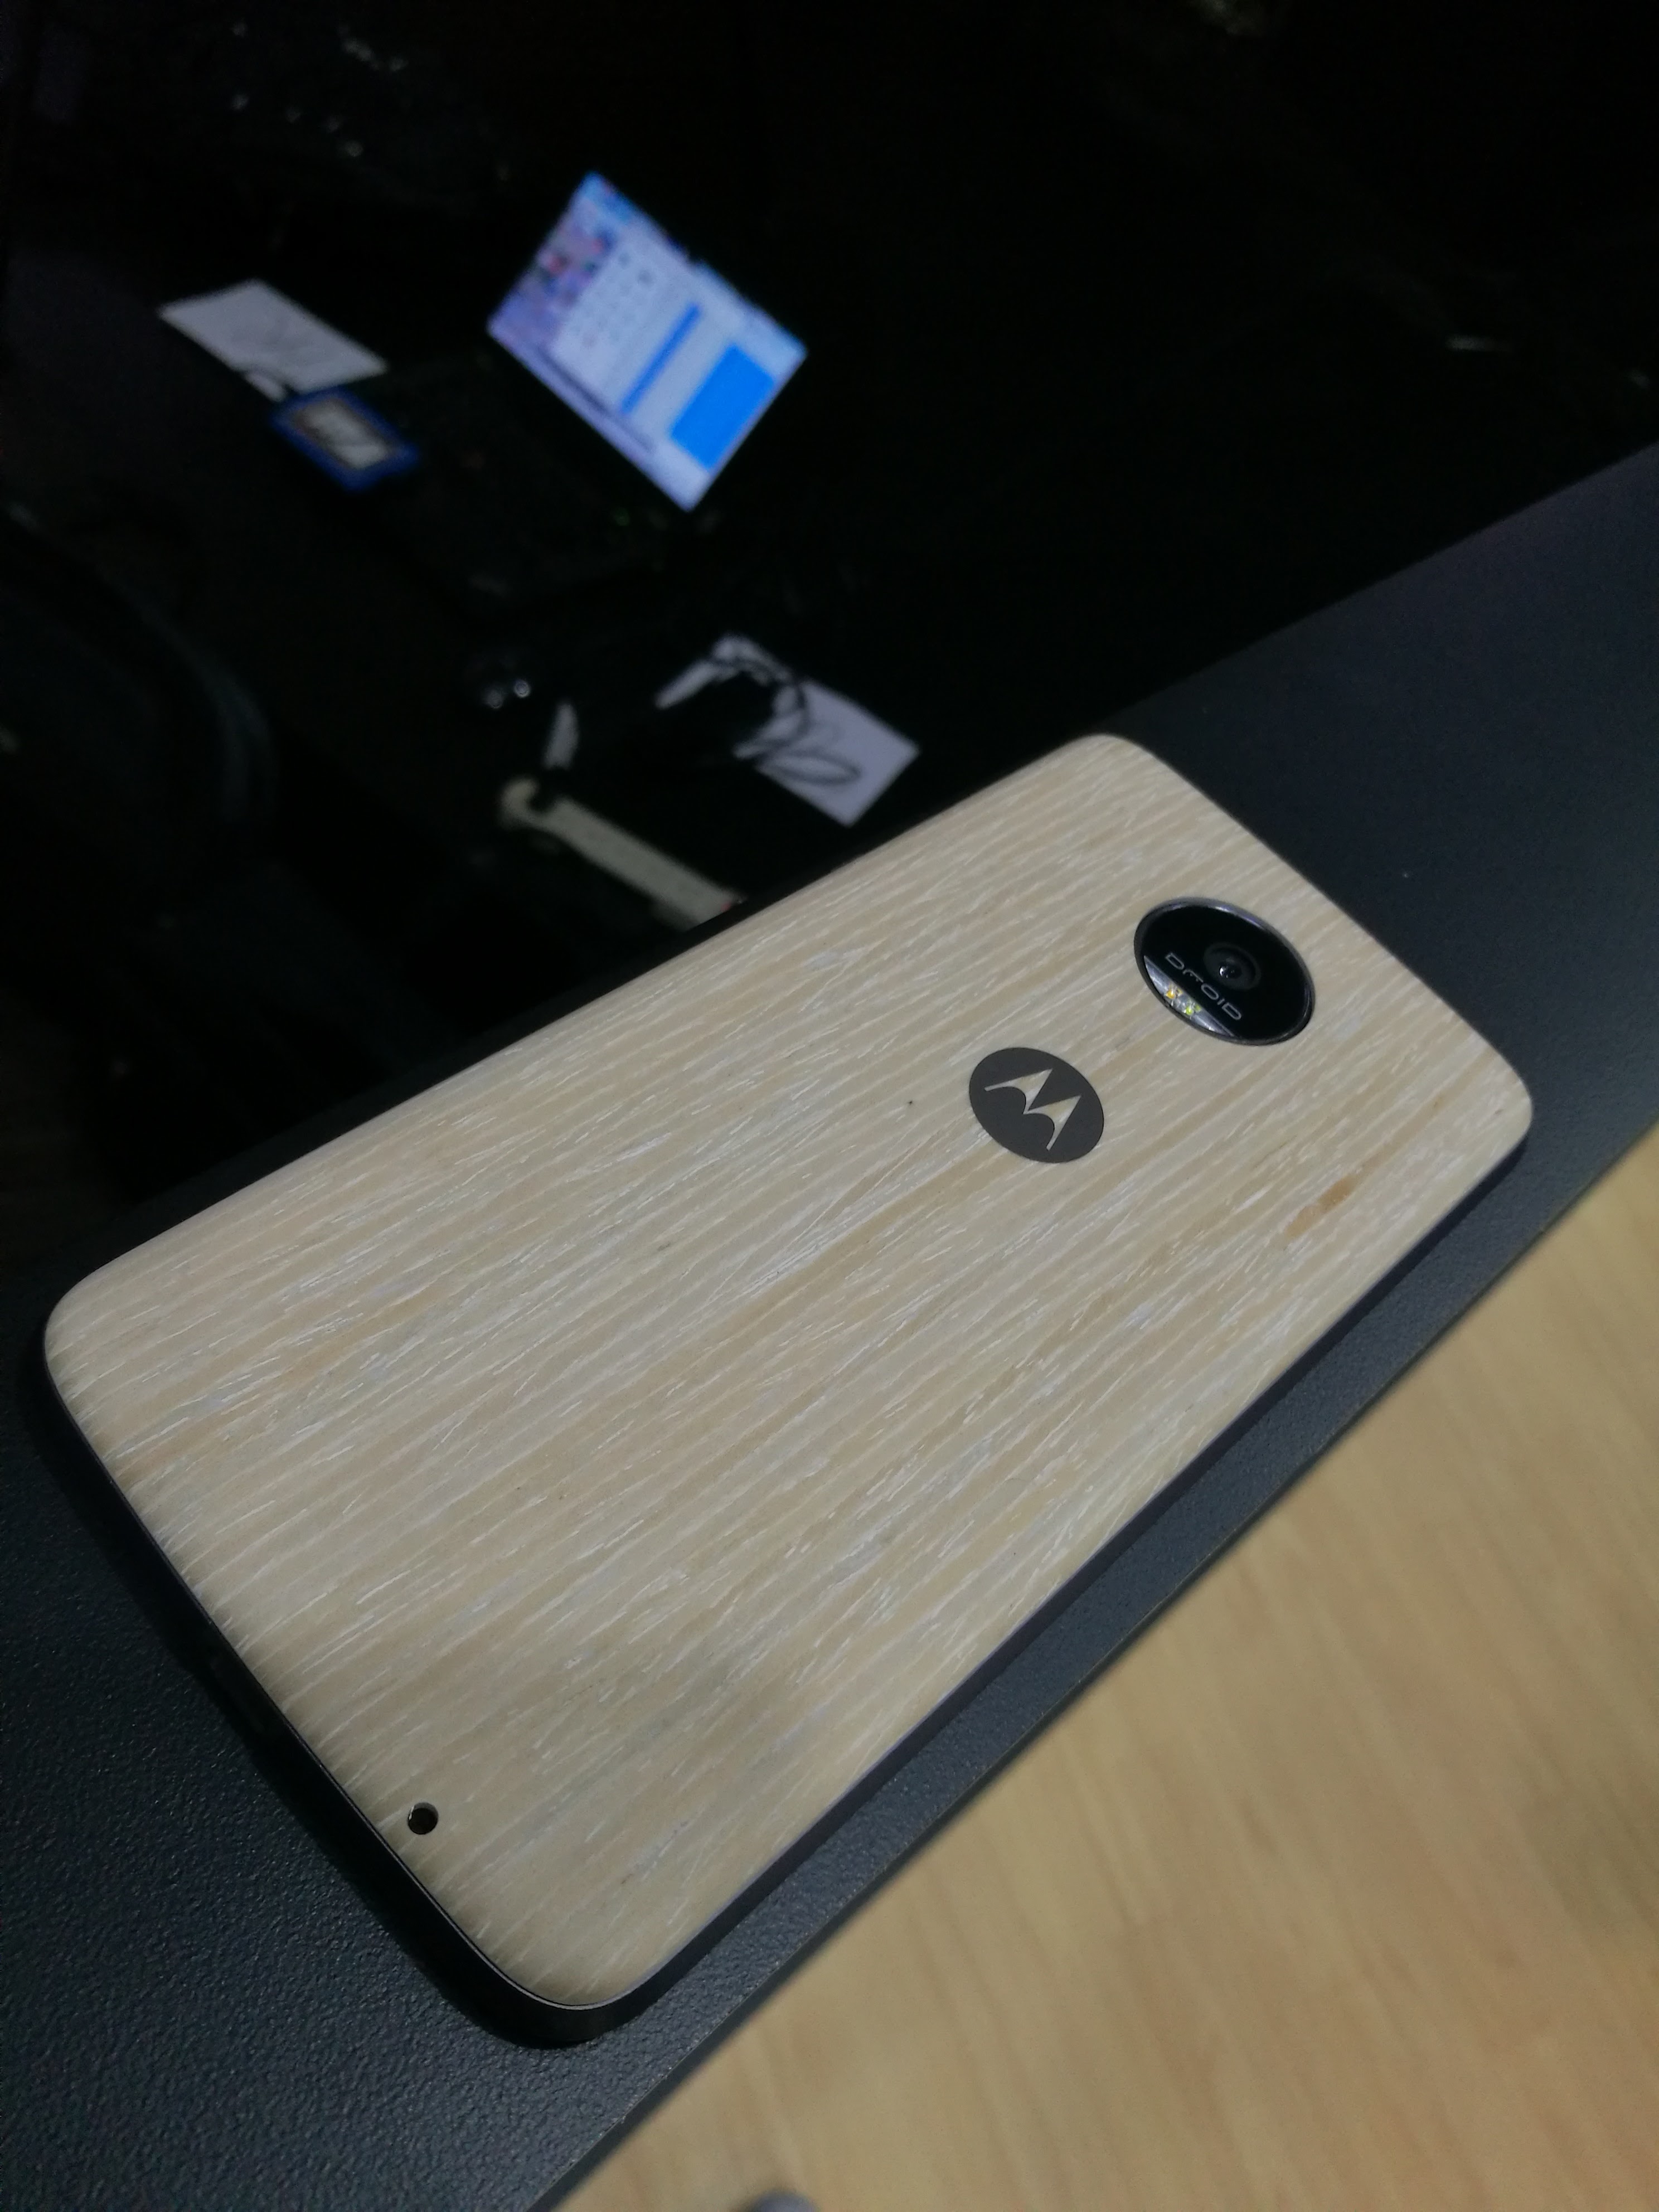 The Moto Z Force with a case on it.